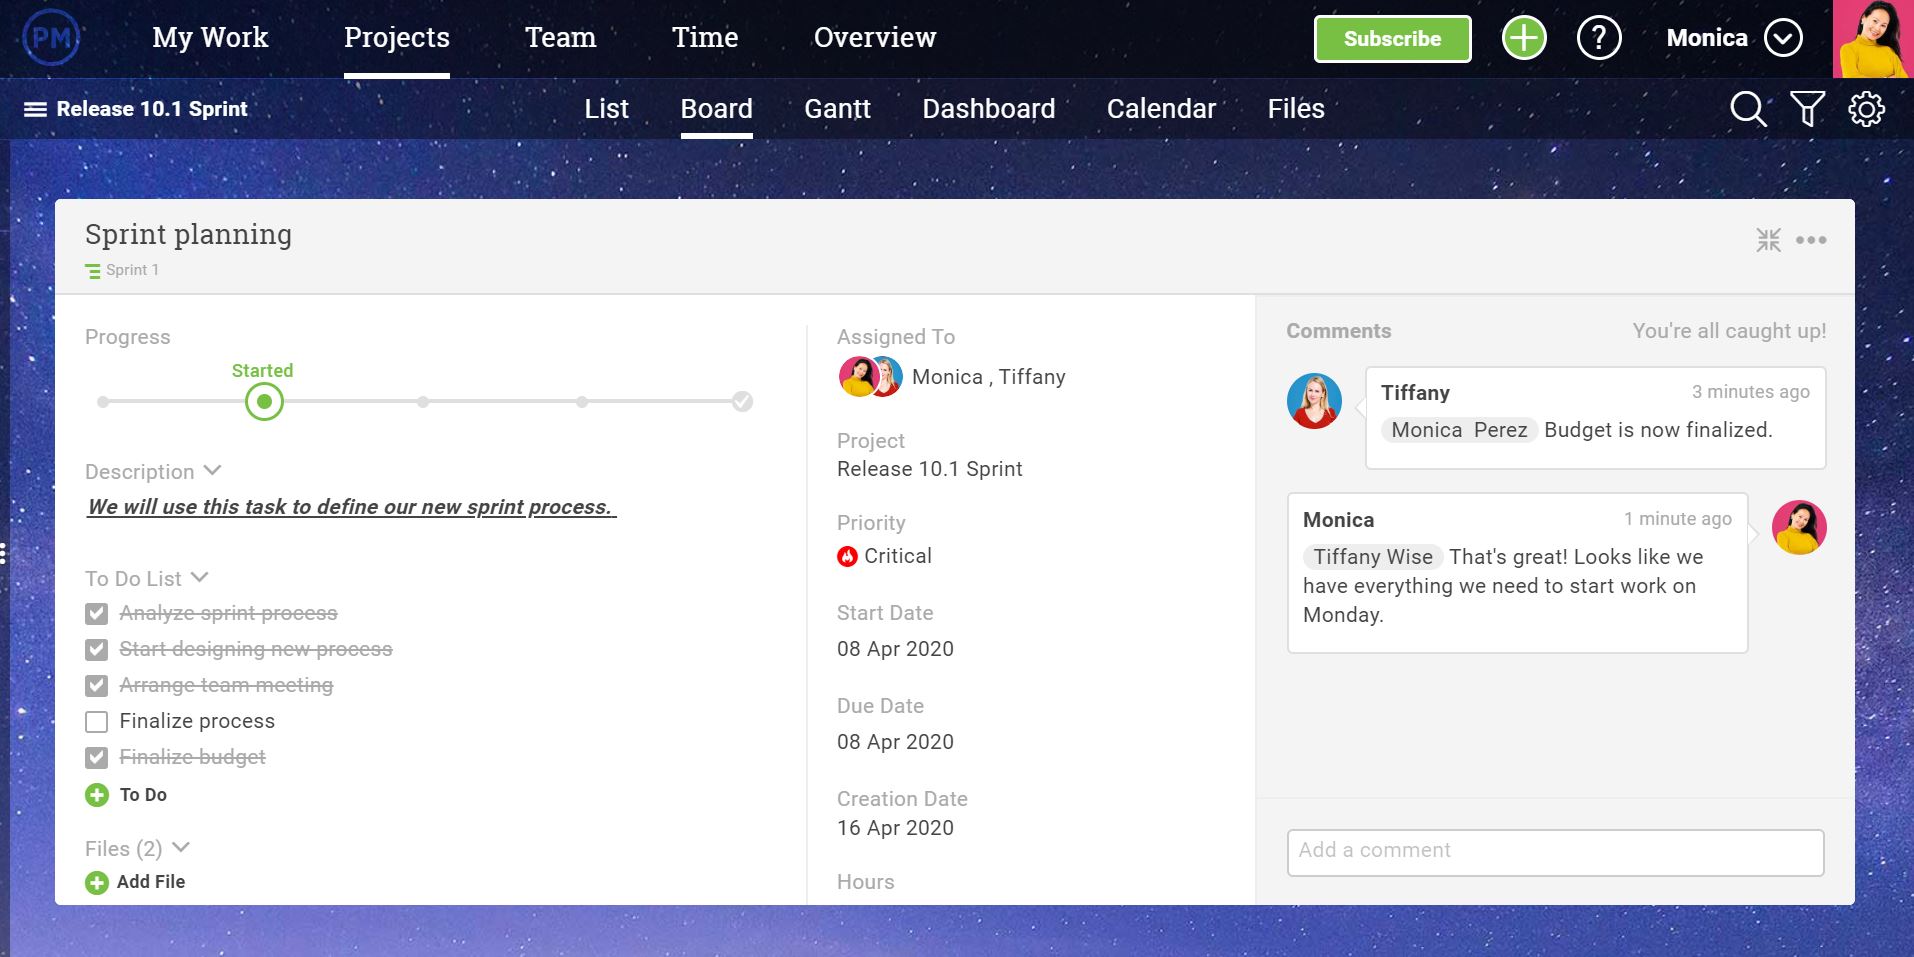 A screenshot of ProjectManager.com's interface, showing a task with different team members commenting on it.